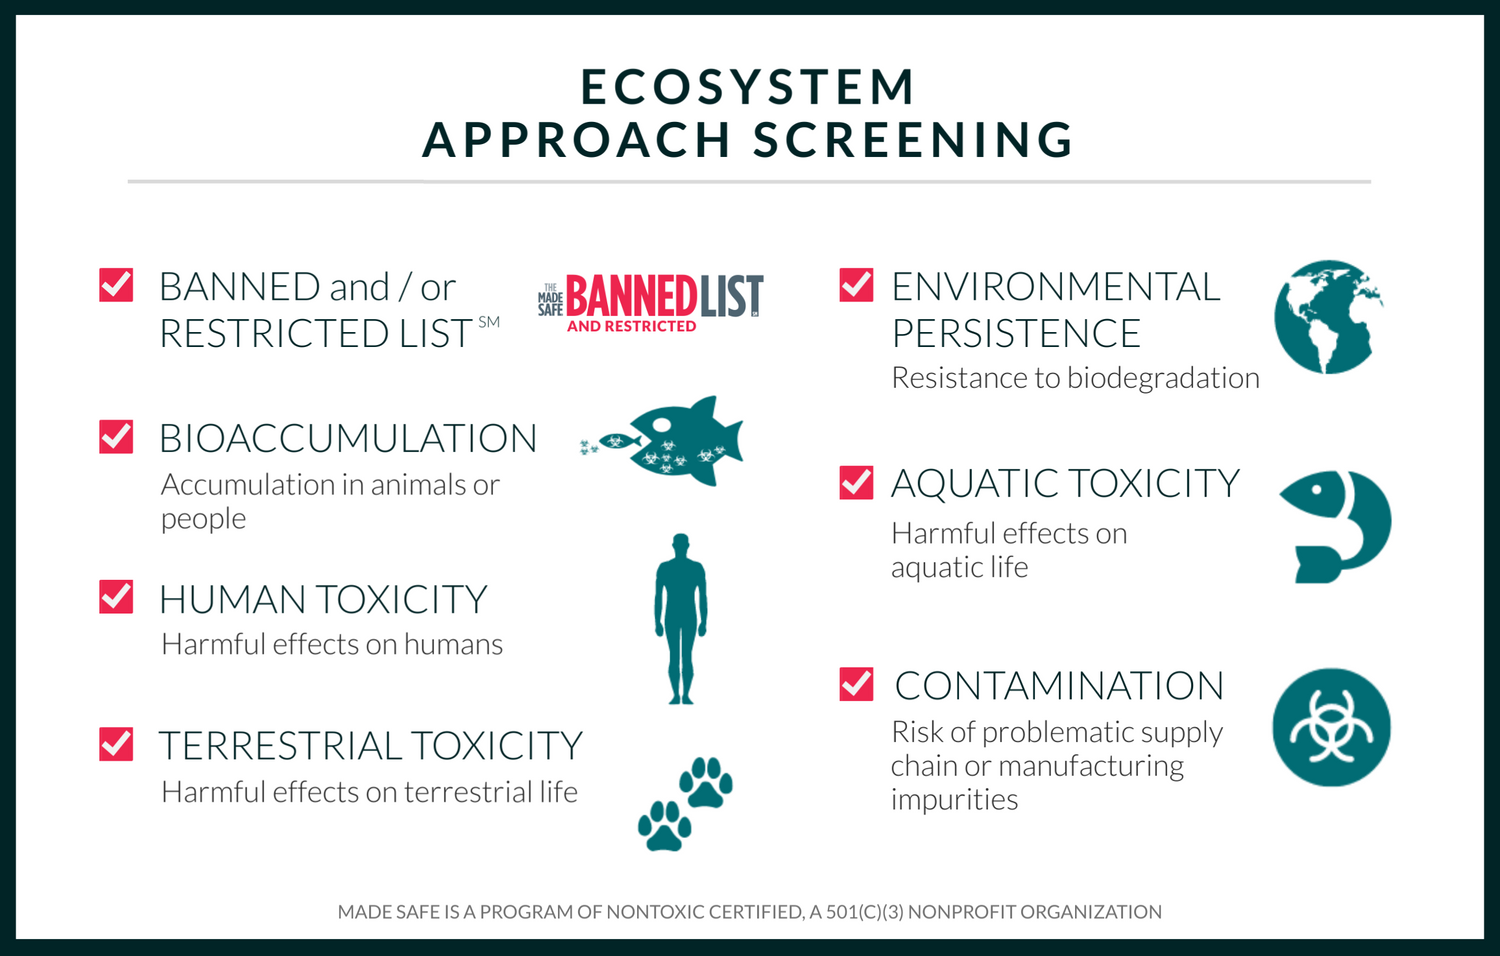 MADE SAFE Ecosystem Approach Screening Process